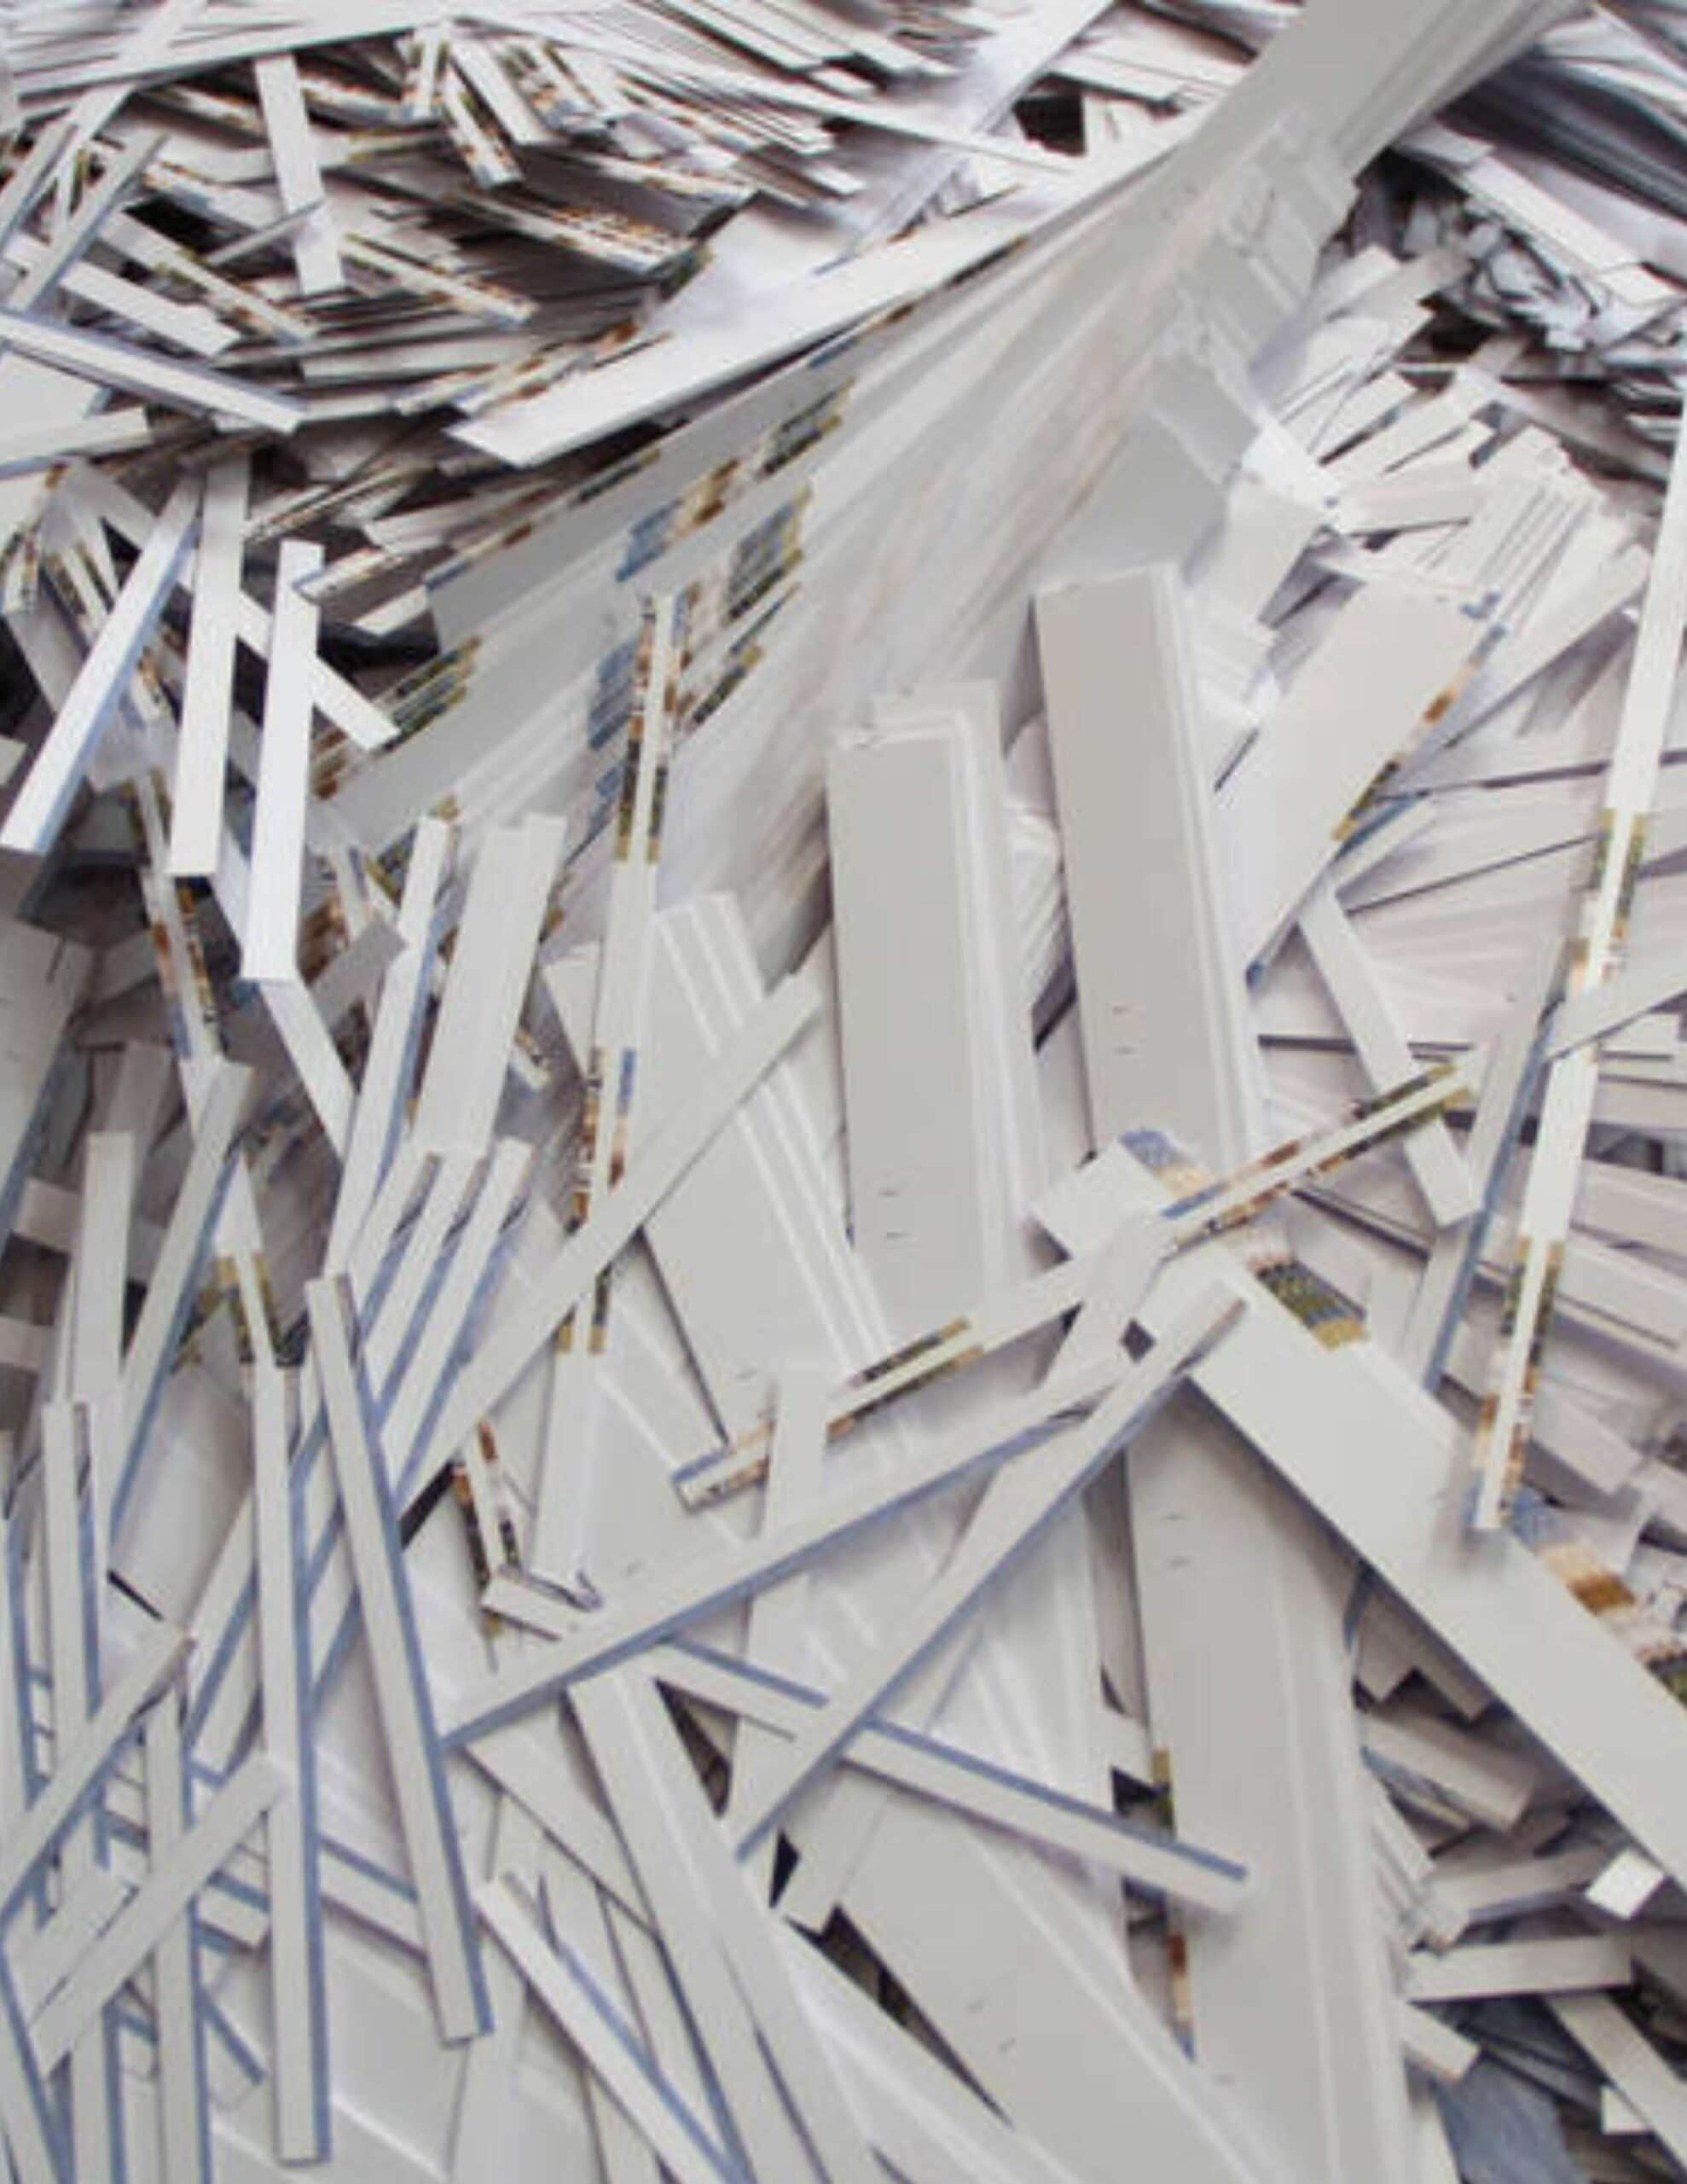 Shredded confidential documents